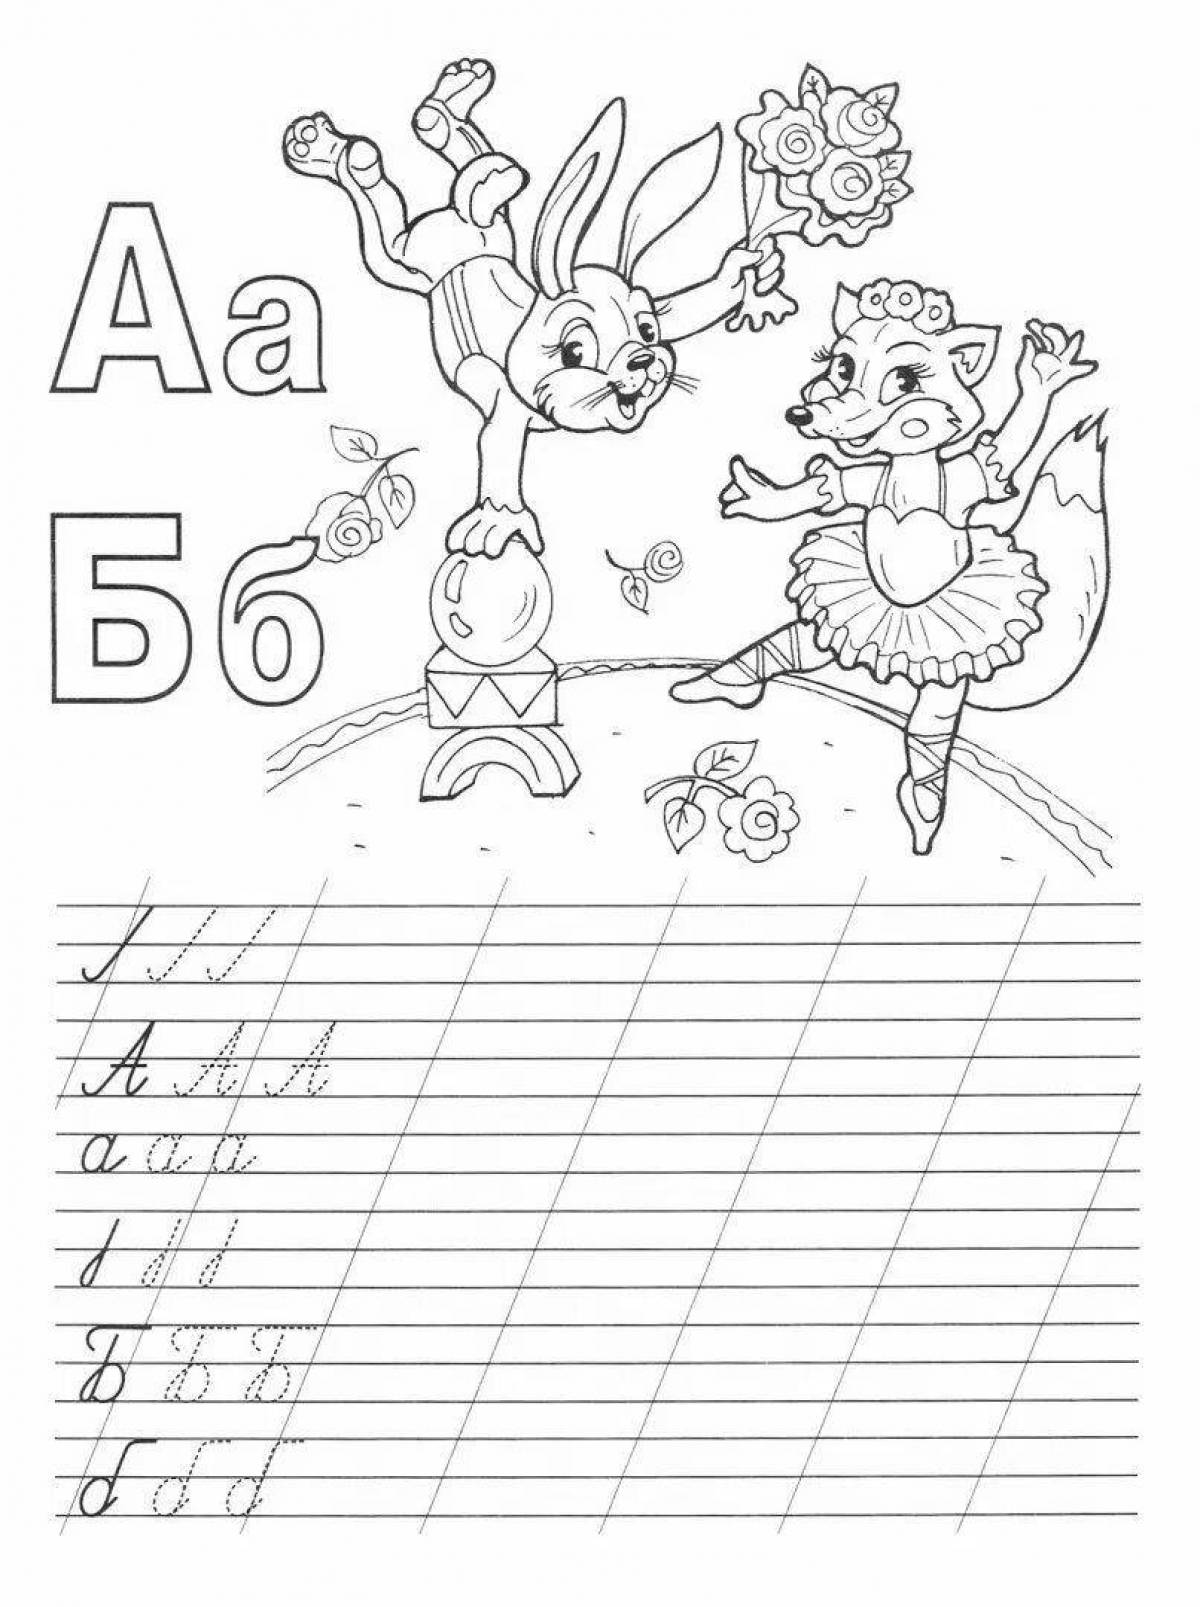 Exciting coloring spelling of the alphabet